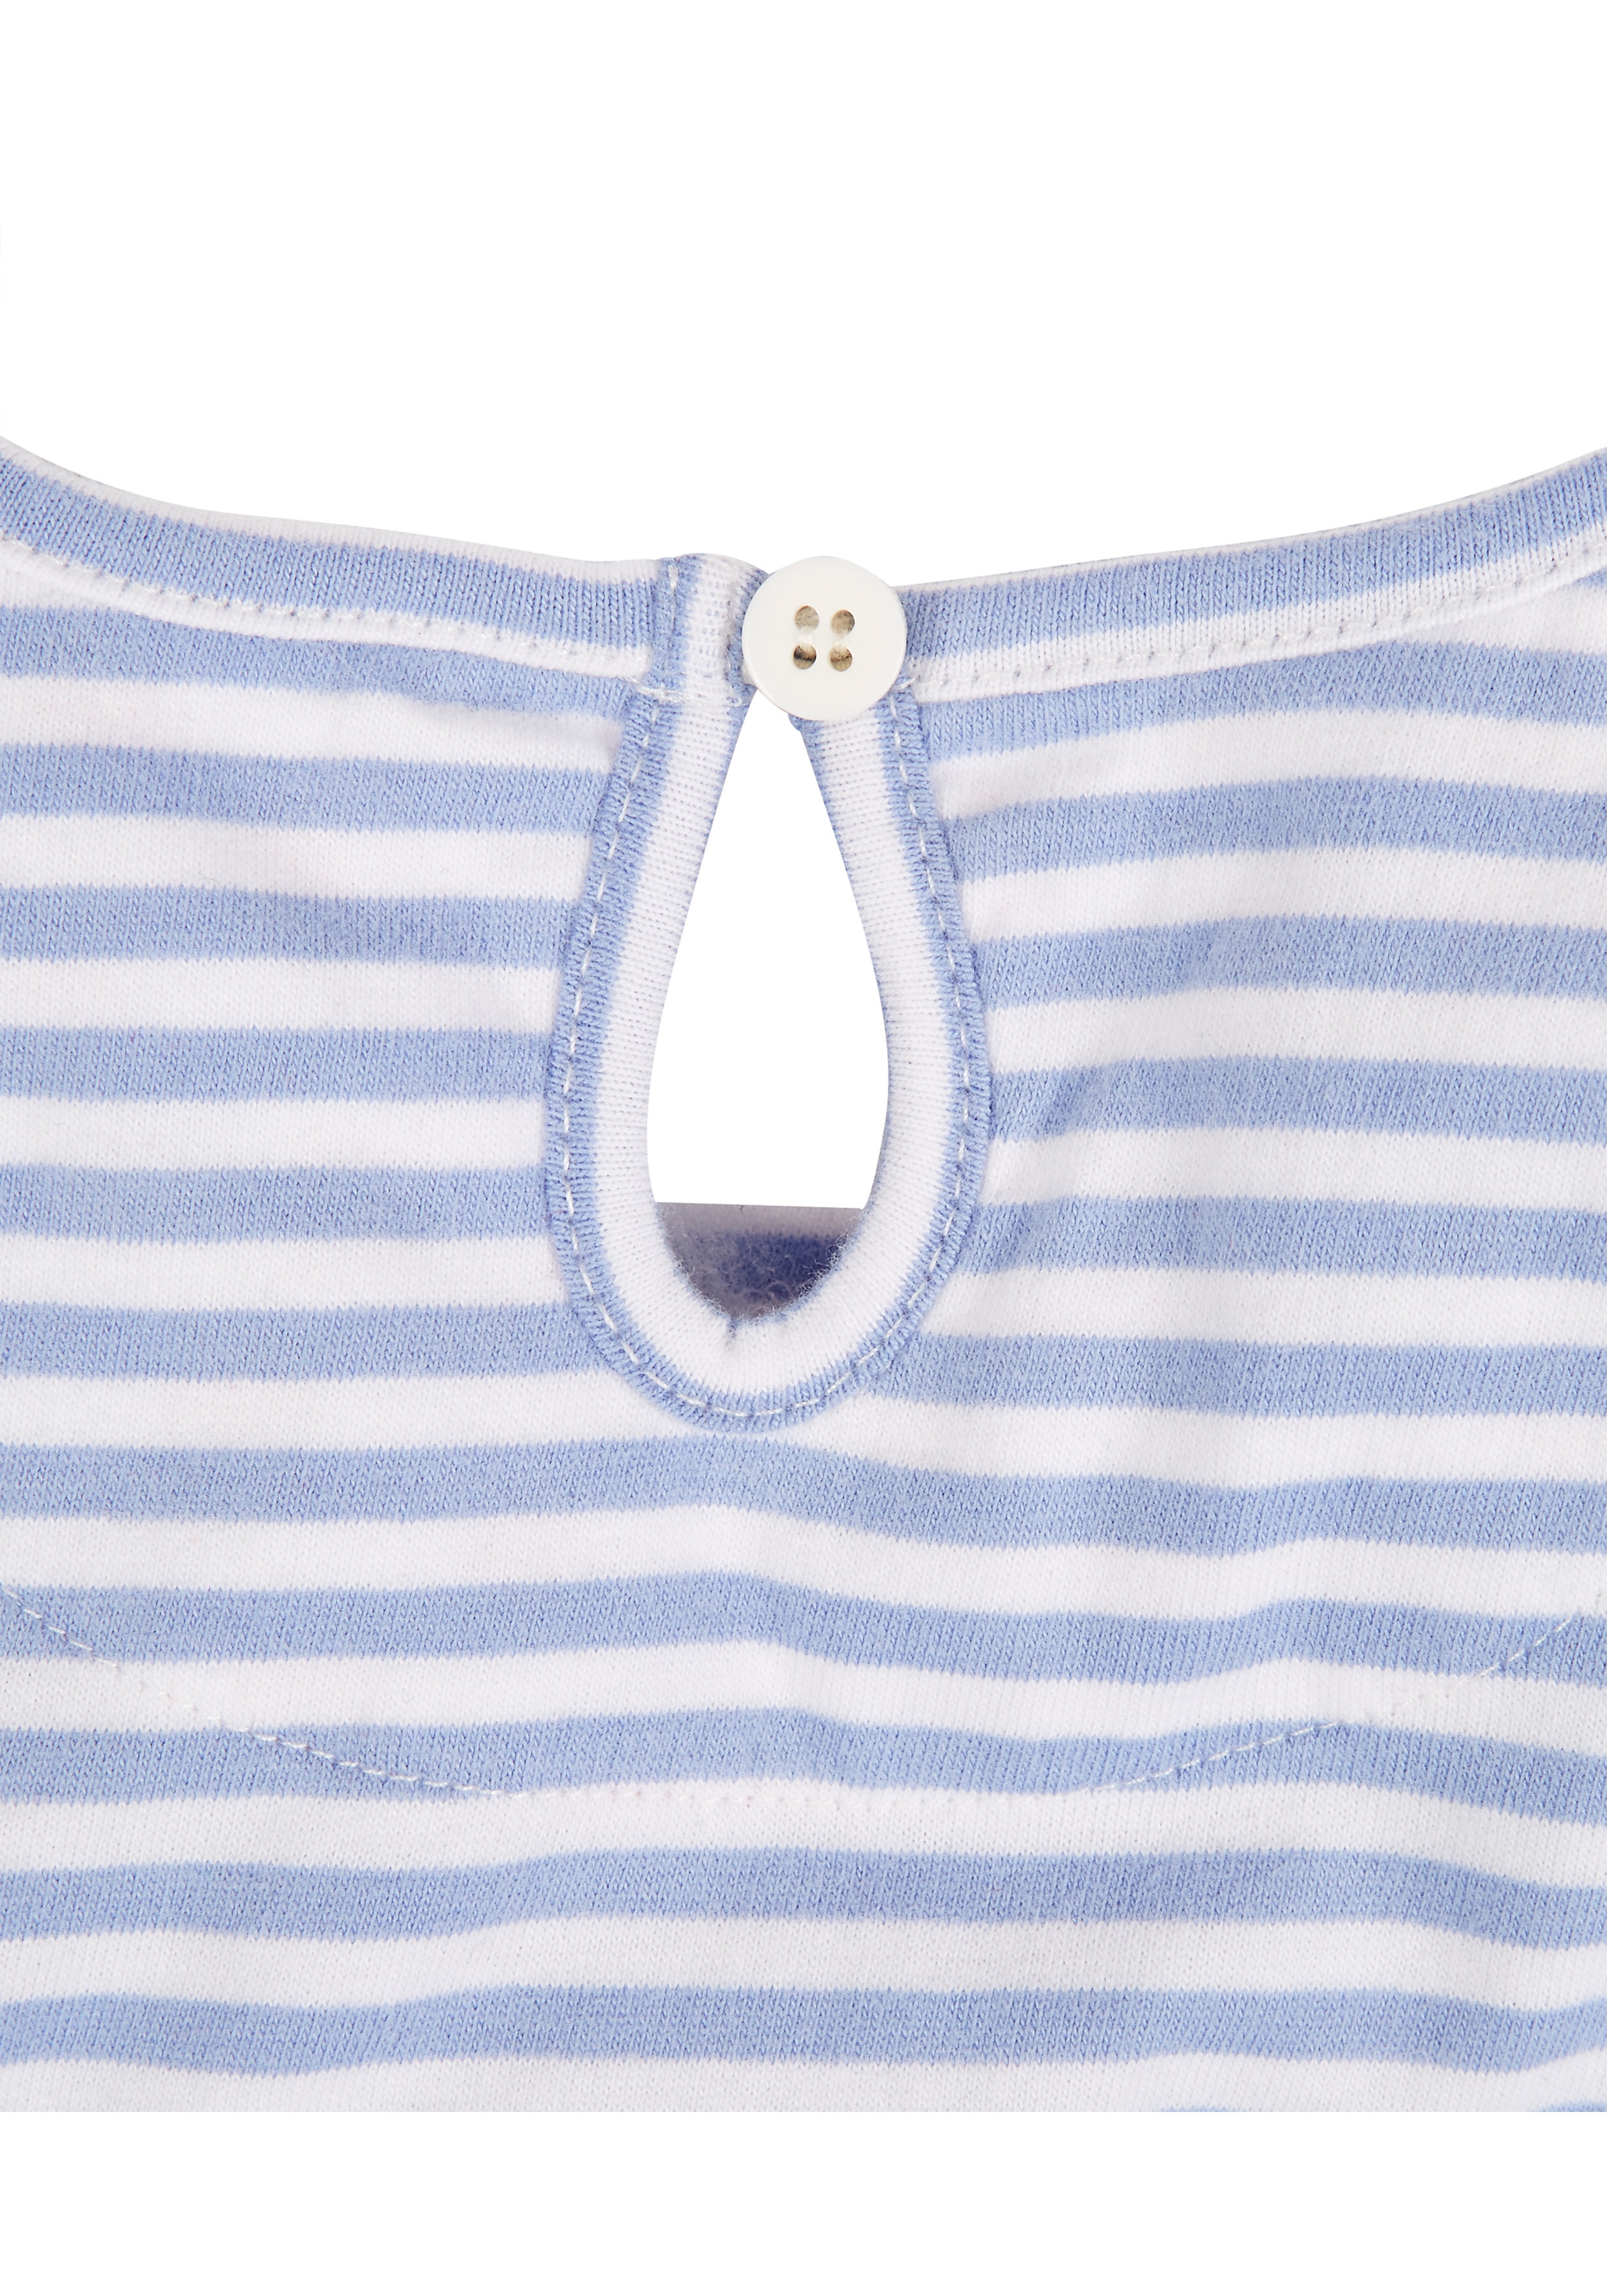 Mothercare | Girls Floral And Striped Nightdresses - Pack Of 2 2